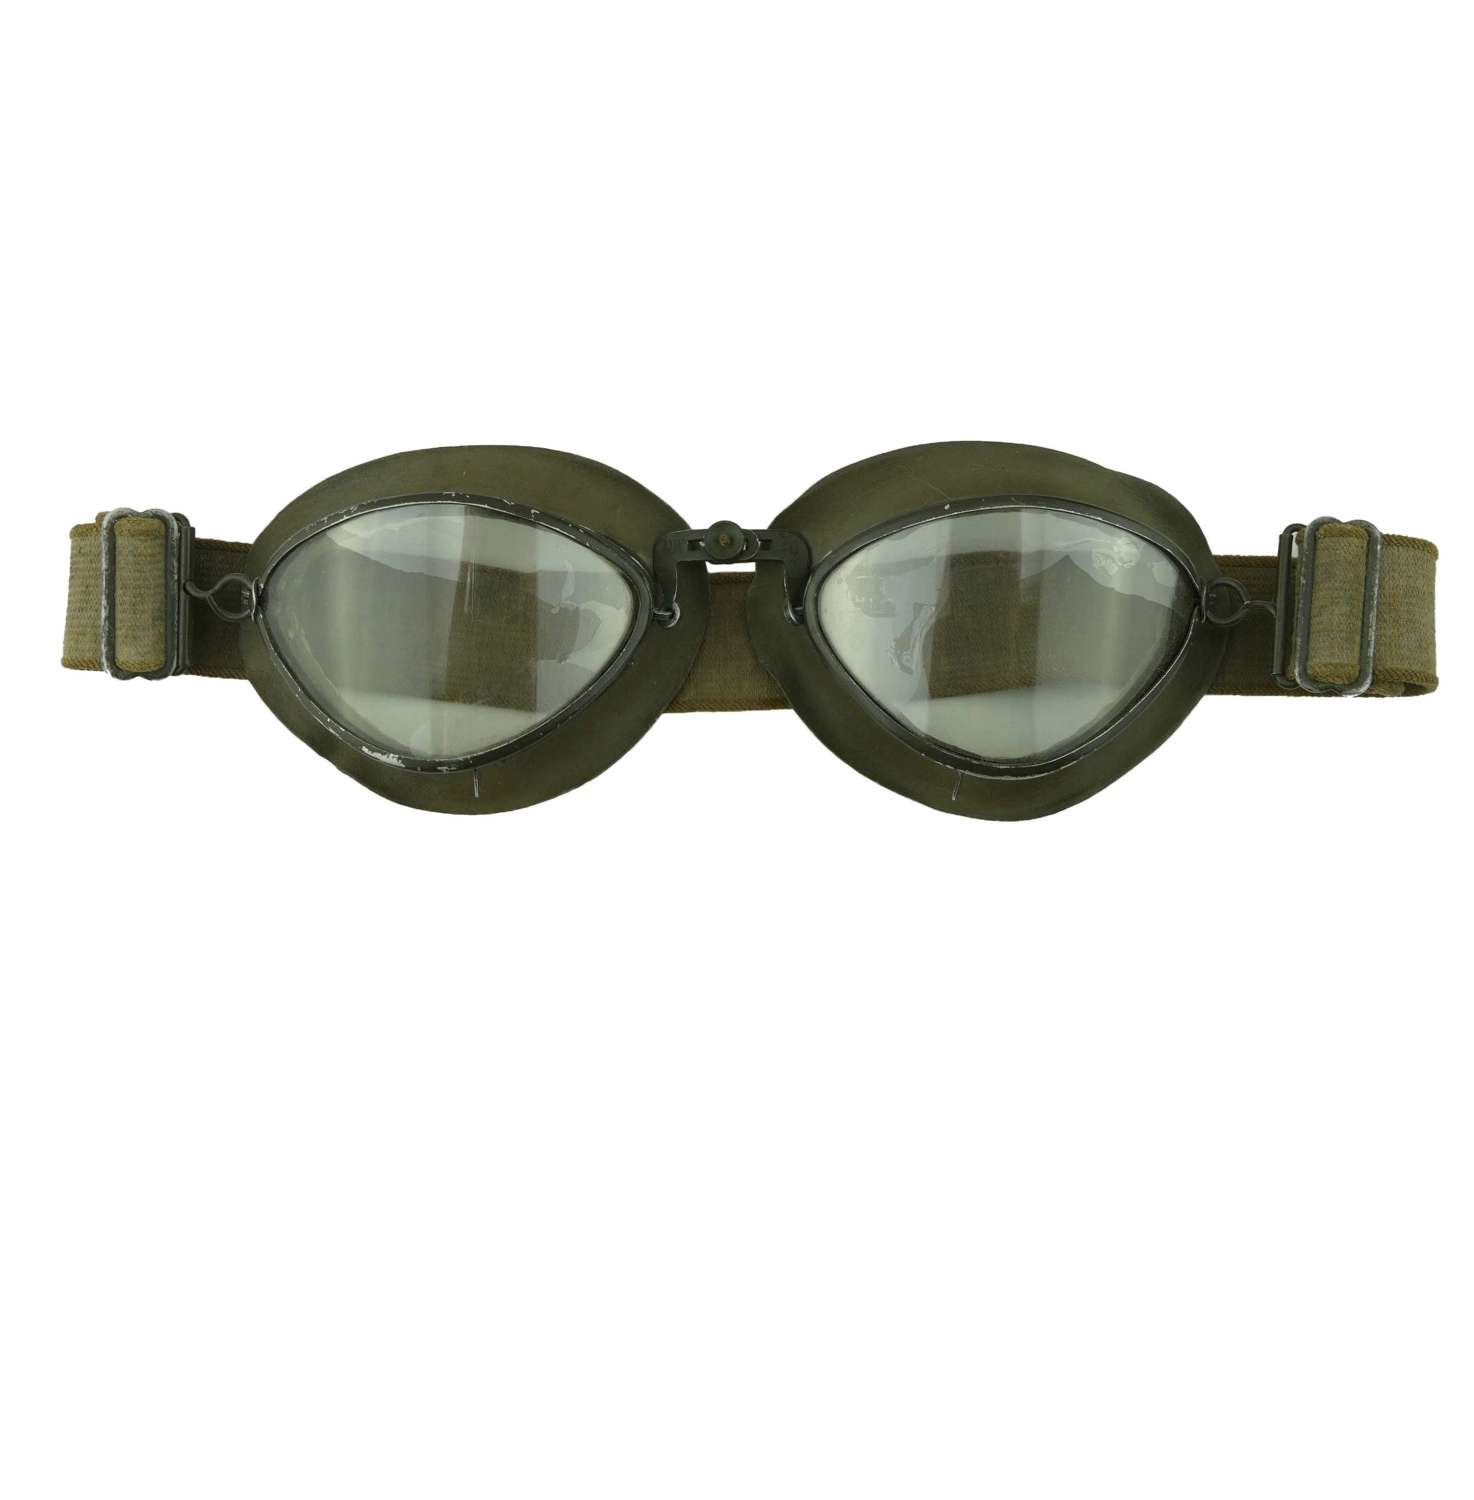 Luftwaffe 'used' general purpose goggles